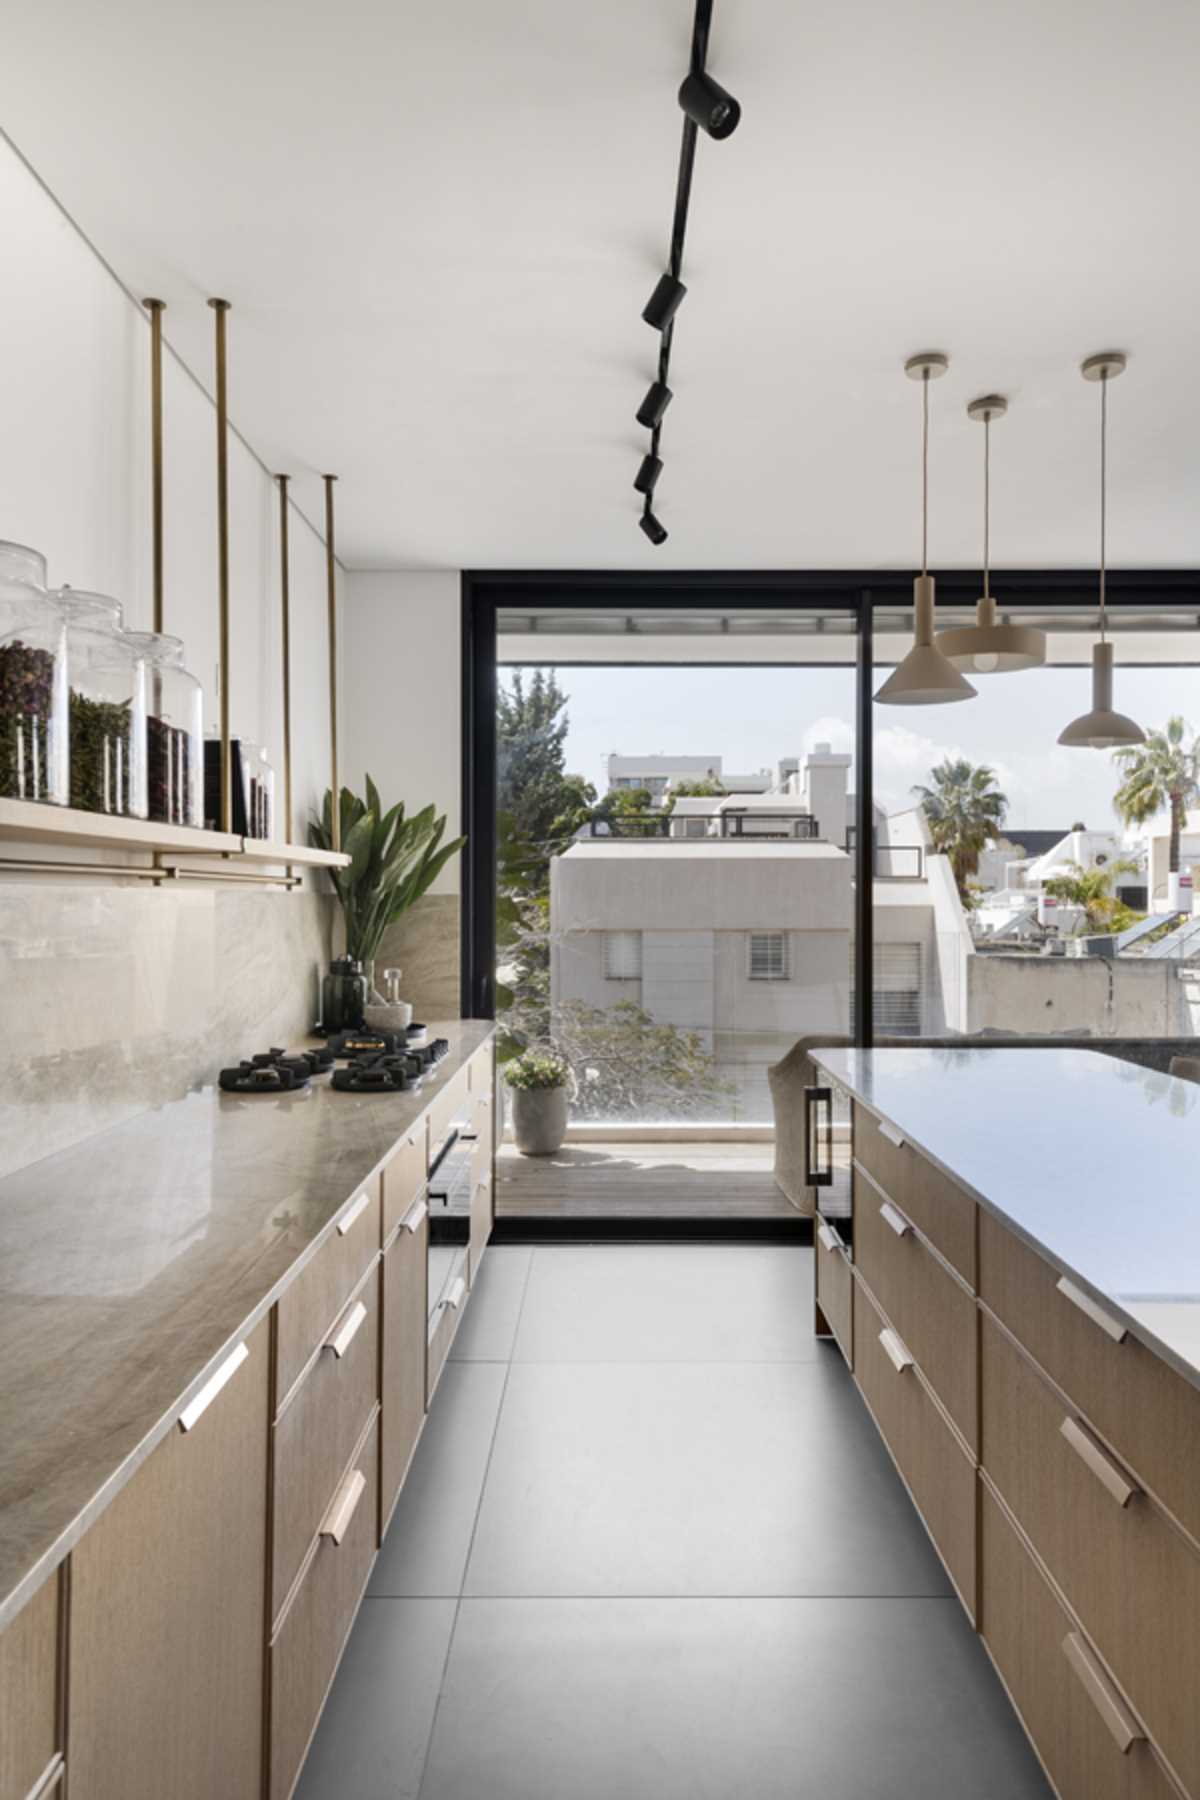 This modern kitchen includes a minimalist shelf hanging from the ceiling instead of upper cabinets, keeps the space feeling open, and offers the chance to display filled glass jars.